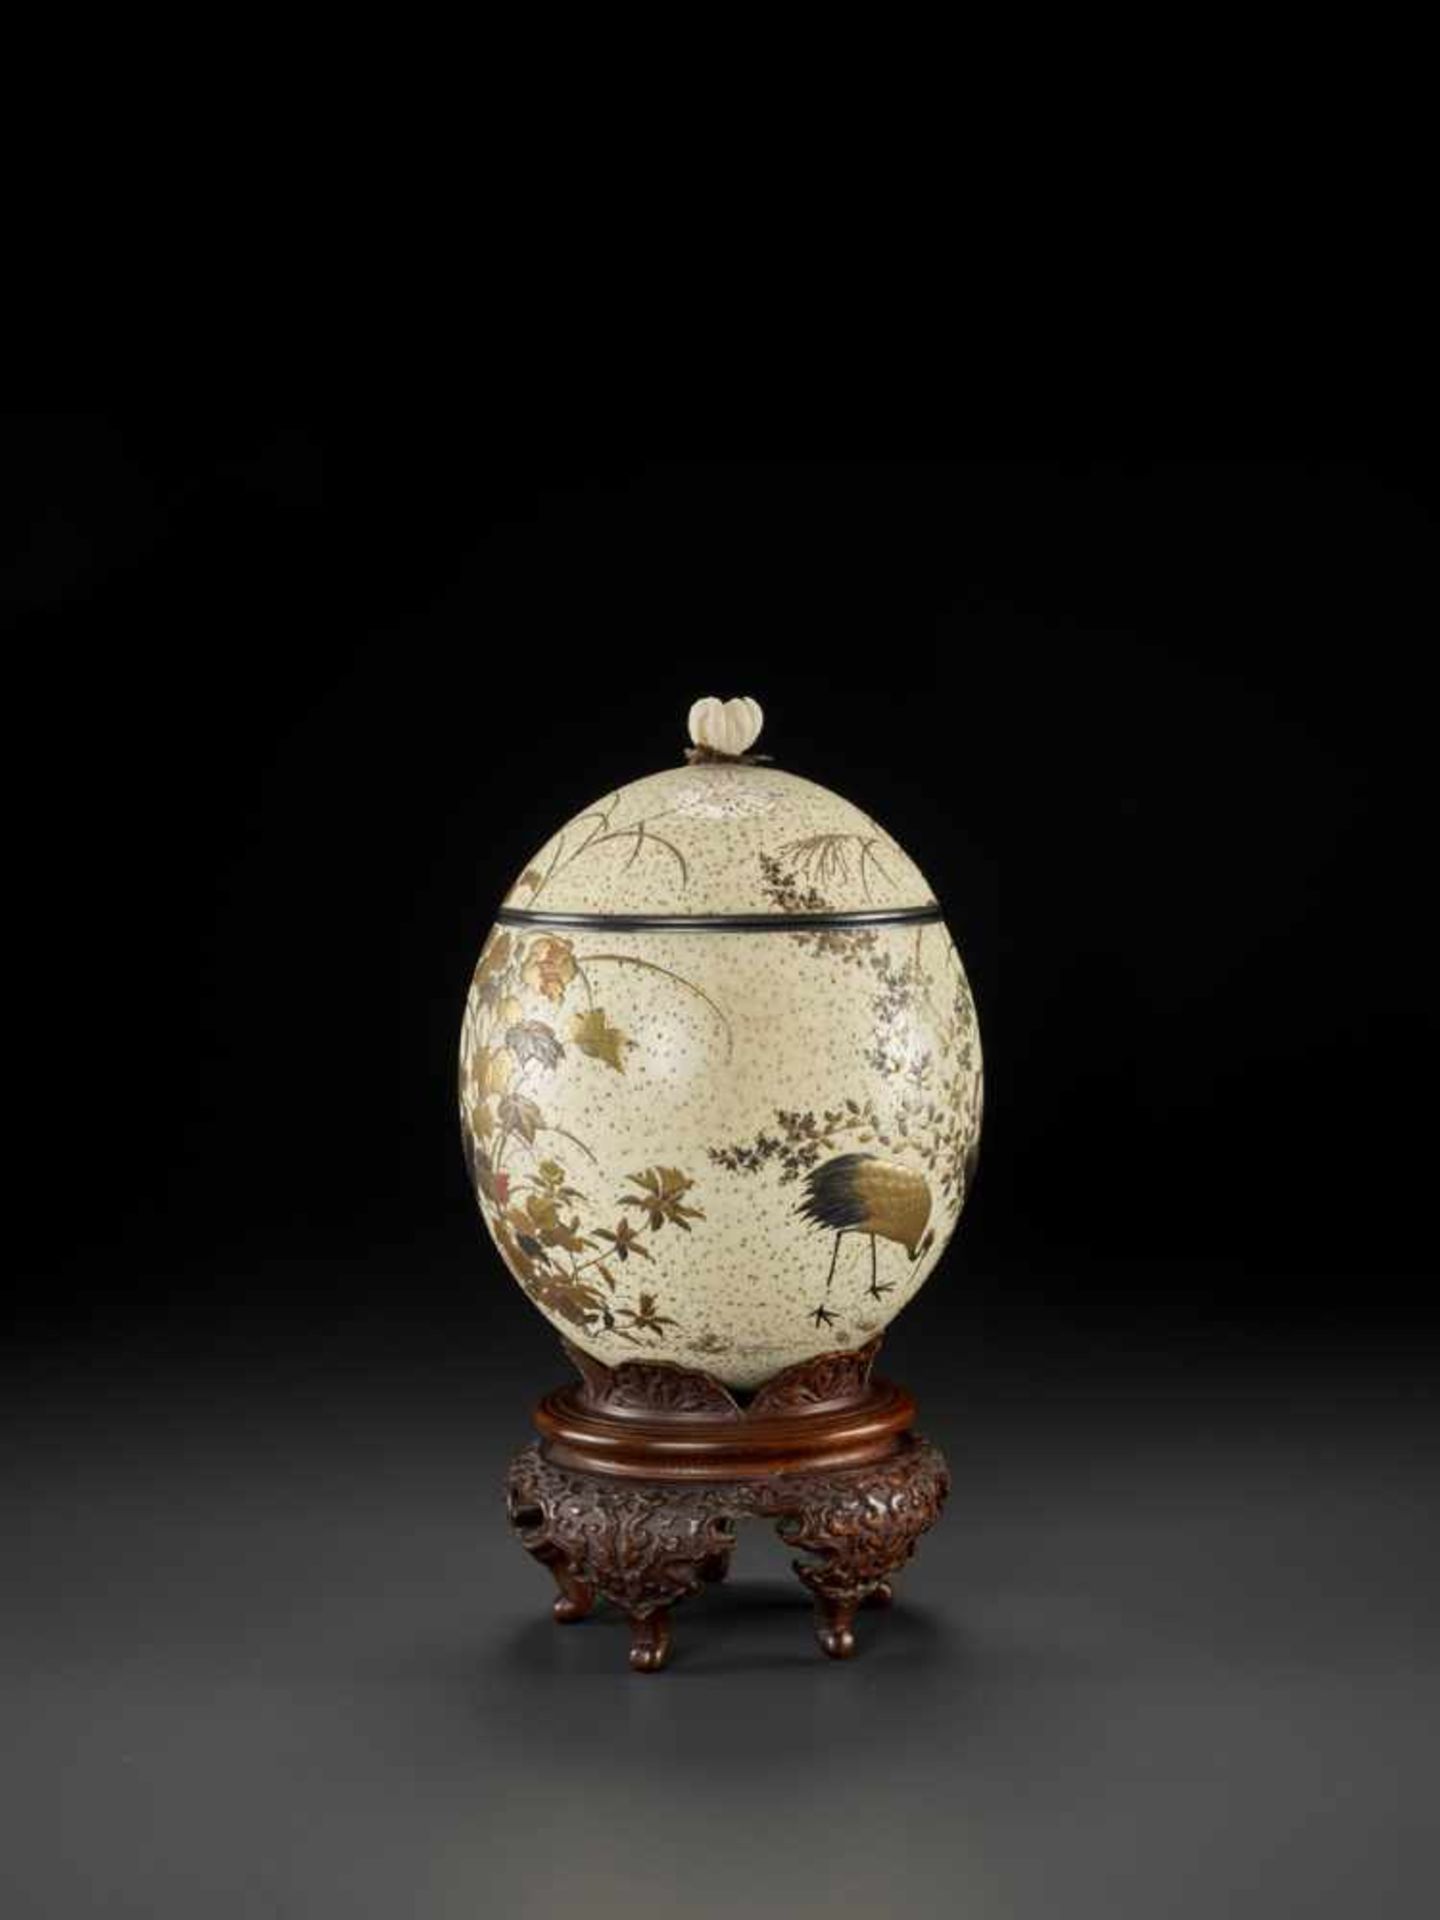 A FINELY LACQUERED OSTRICH EGG Japan, late 19th century, Meiji period (1868-1912)The speckled egg is - Bild 4 aus 10